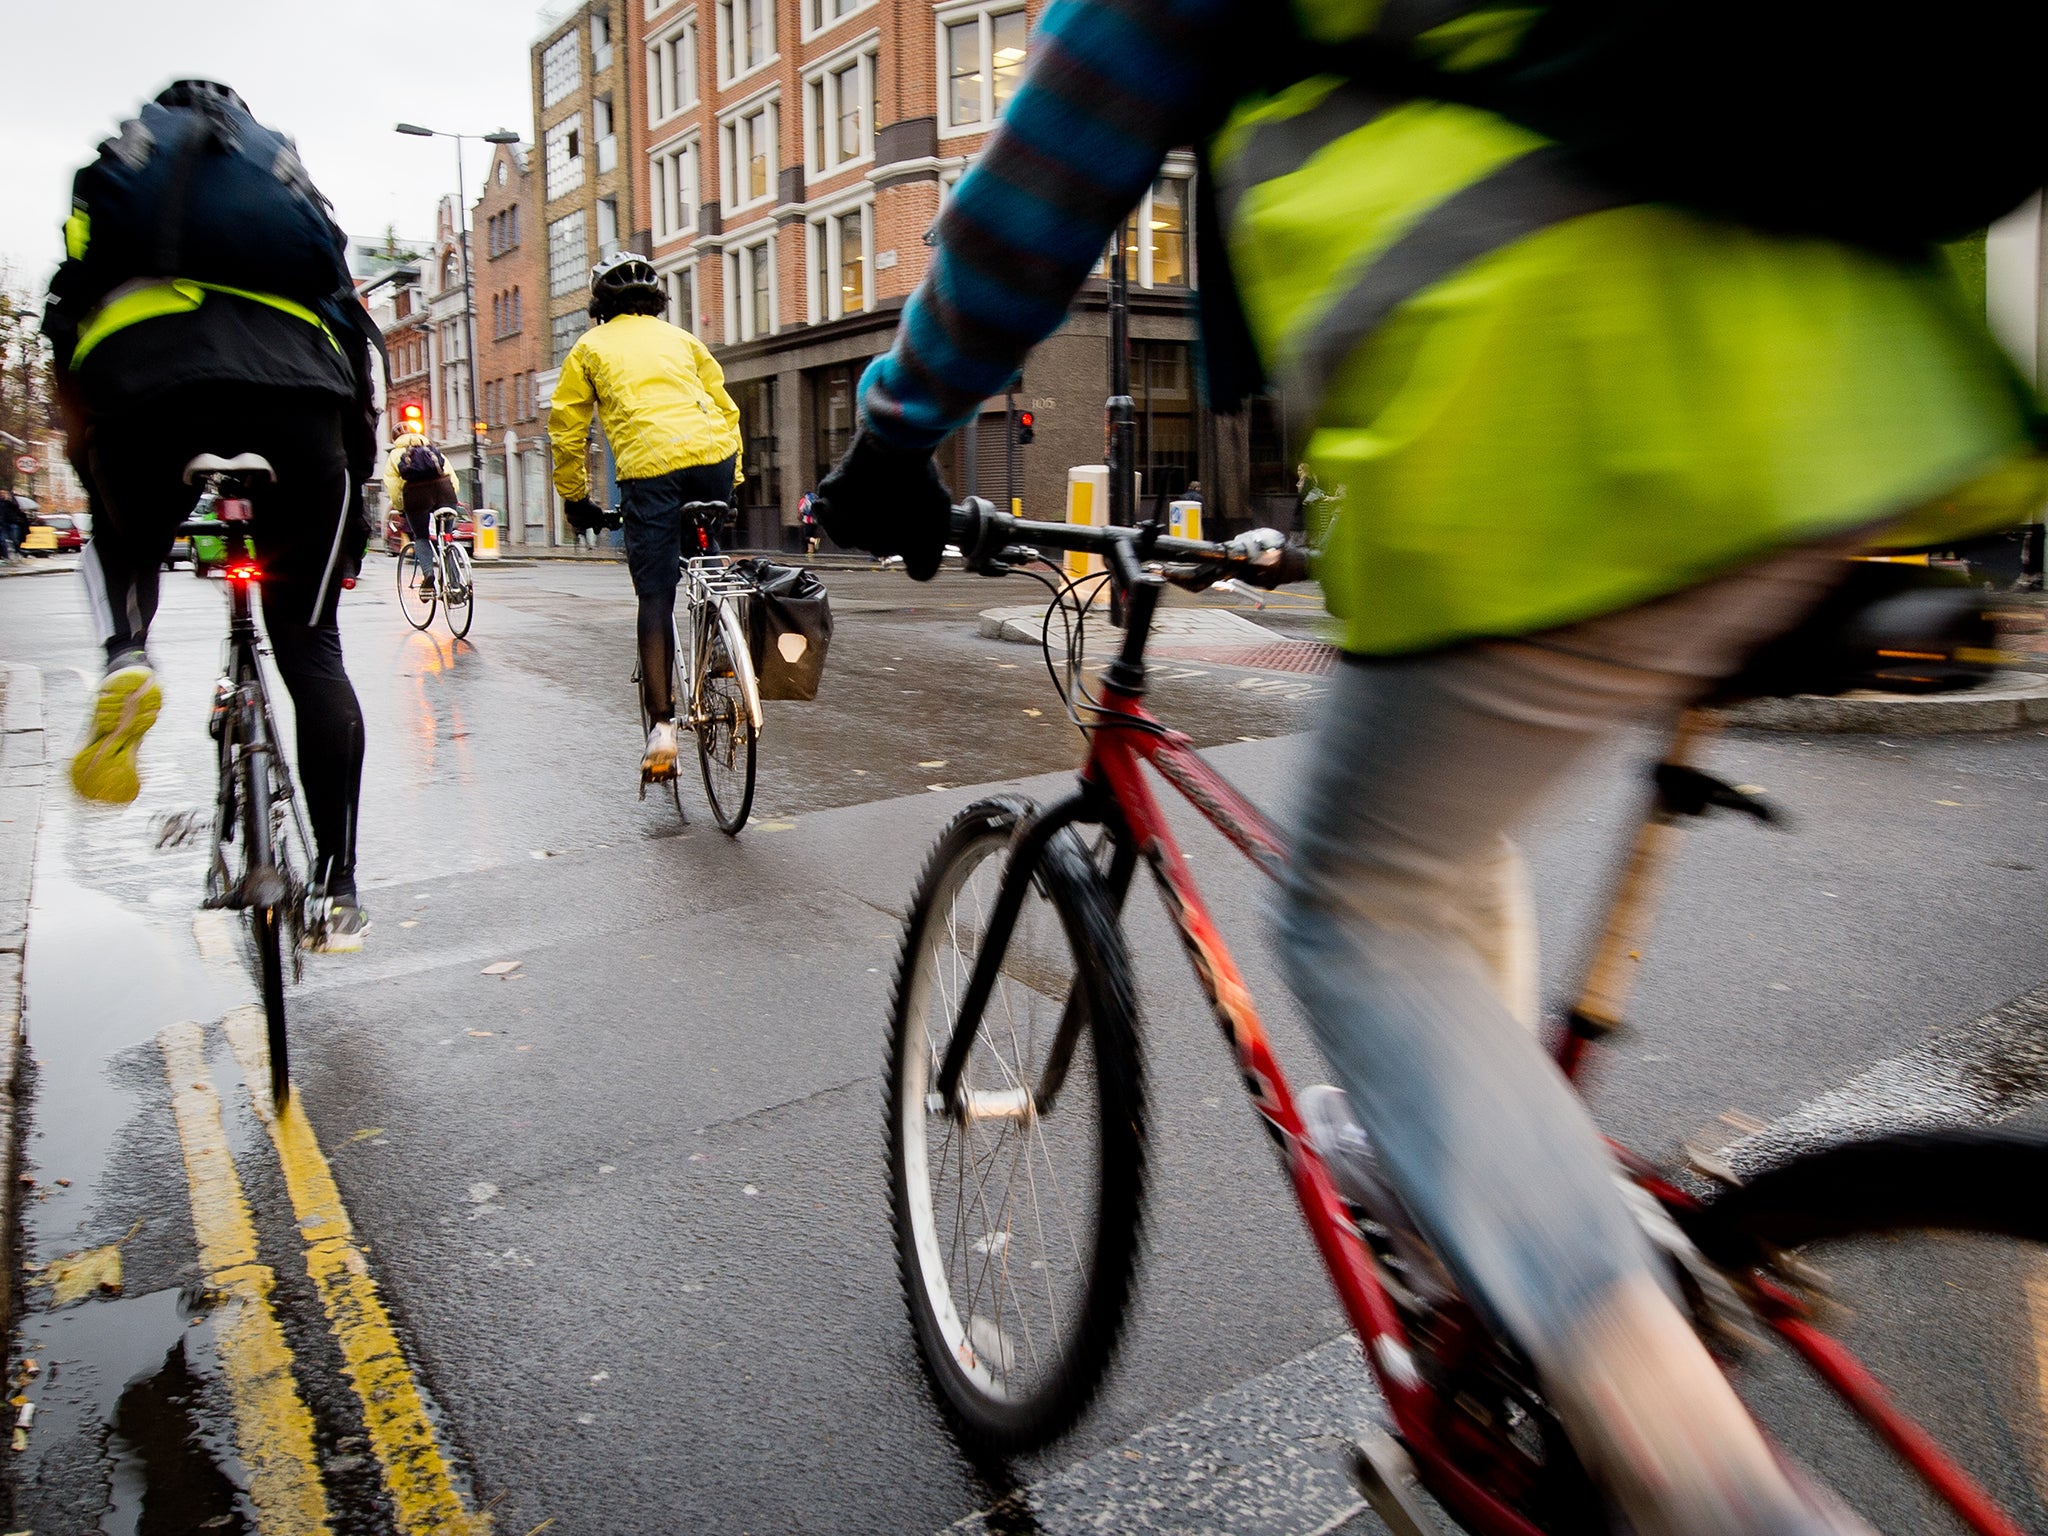 The Department of Transport has released proposals to double cycling by 2025